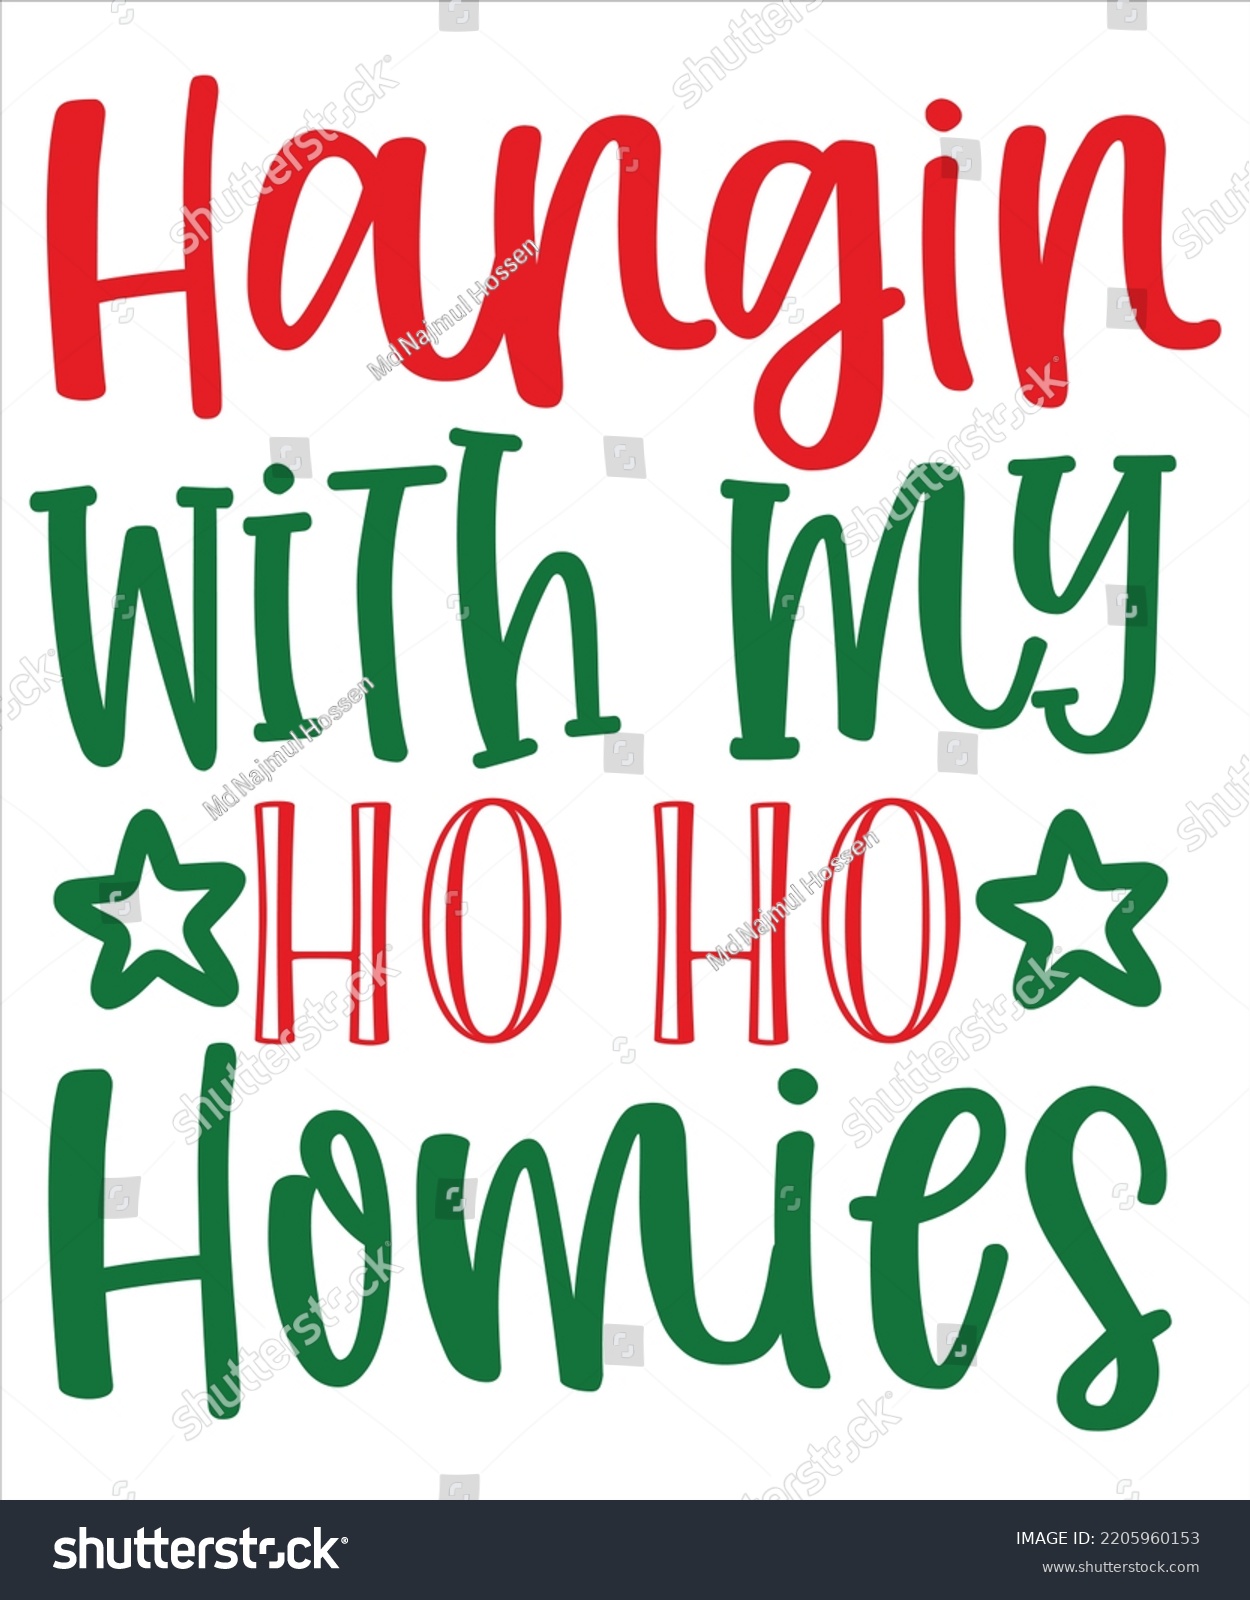 SVG of Hangin With My HoHo Homies, Merry Christmas shirts, mugs, signs lettering with antler vector illustration for Christmas hand lettered, svg, Christmas svg, Christmas Clipart Silhouette cutting svg